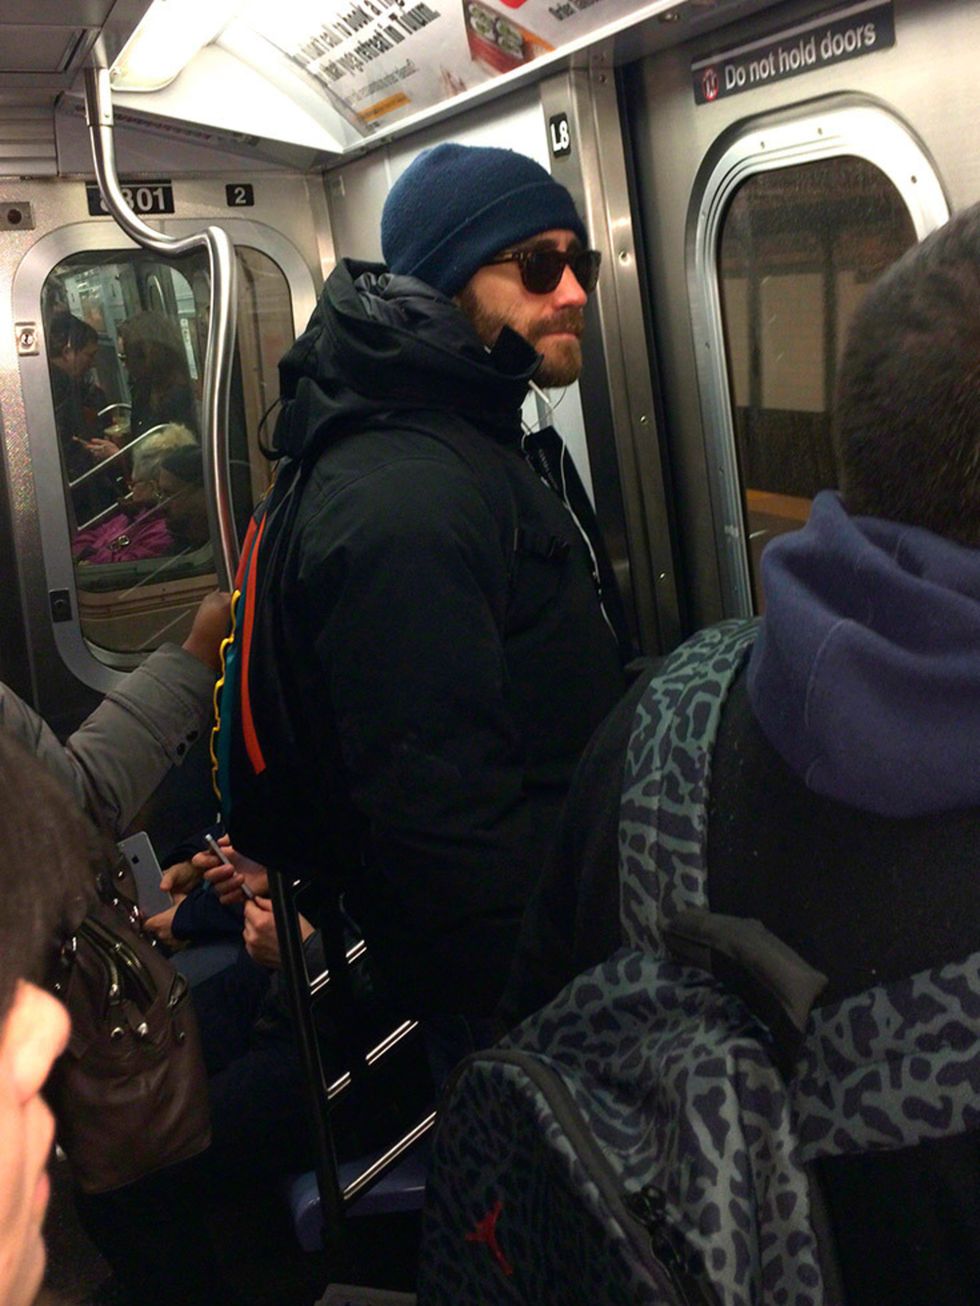 <p><p><strong>JAKE GYLLENHAAL</strong></p><p>Spotted: Jake Gyllenhaal riding the subway in sunglasses and a beanie. Surely it can be a matter of time before he graces the London Underground with his A-list presence?</p></p>